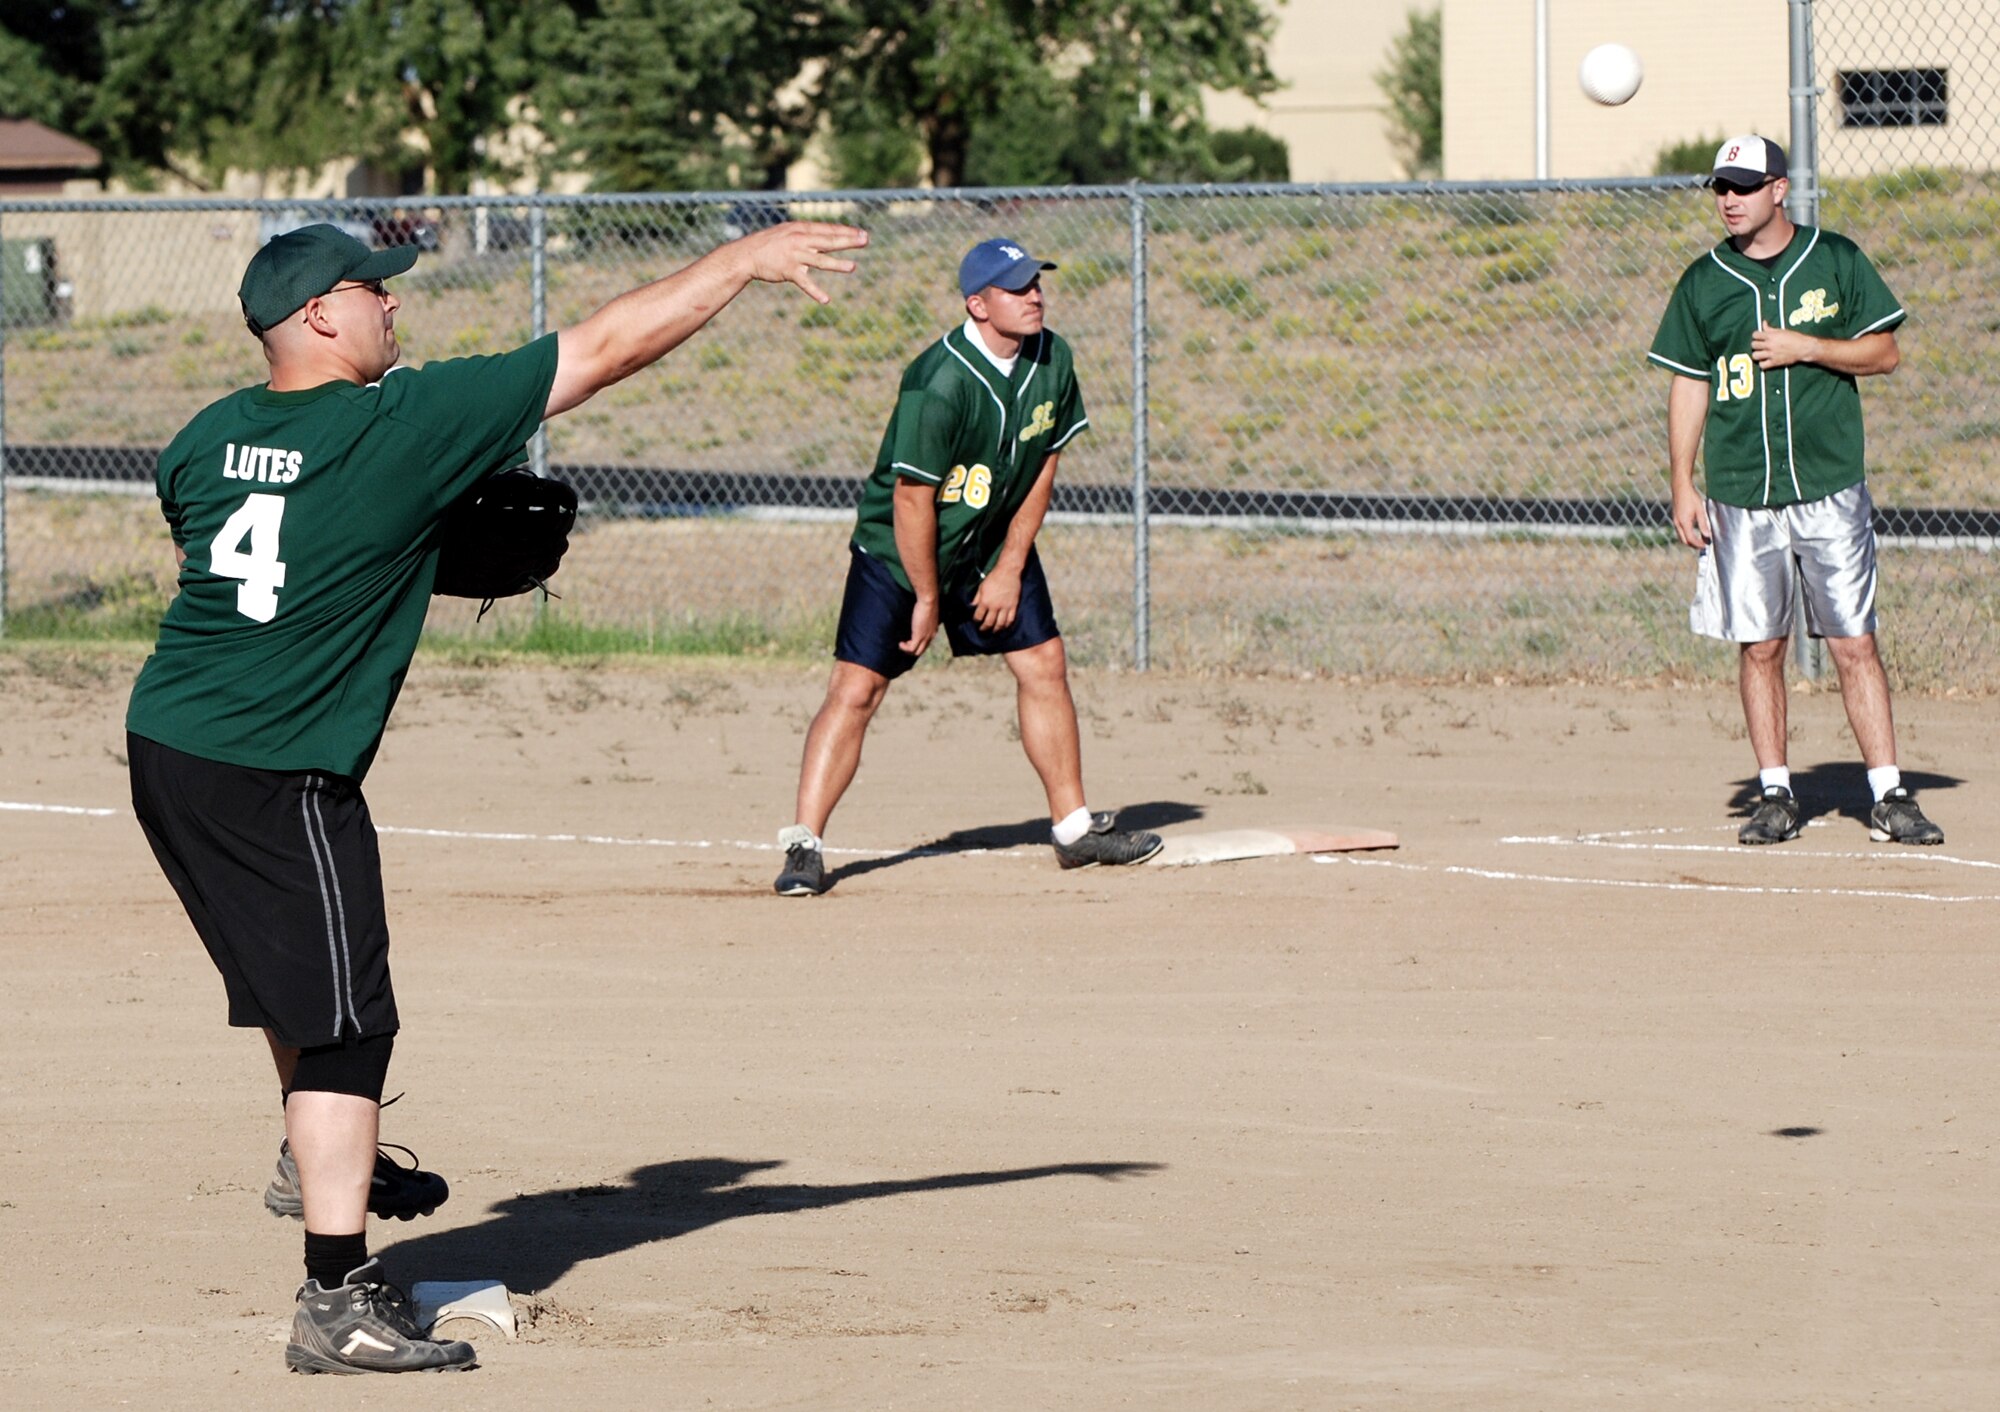 FAIRCHILD AIR FORCE BASE, Wash. -- Tech. Sgt. Albin Lutes, 336th Training Squadron NCOIC of Survival supply, pitches the ball to the catcher during the 2007 Intramural Softball Championship game July 27. The game was close until the 336th scored four in the sixth to put the game out of reach:  the 336th Training Group beat the 92nd Operations Group 17-12. (U.S. Air Force Photo / Staff Sgt. Mikel Daniel